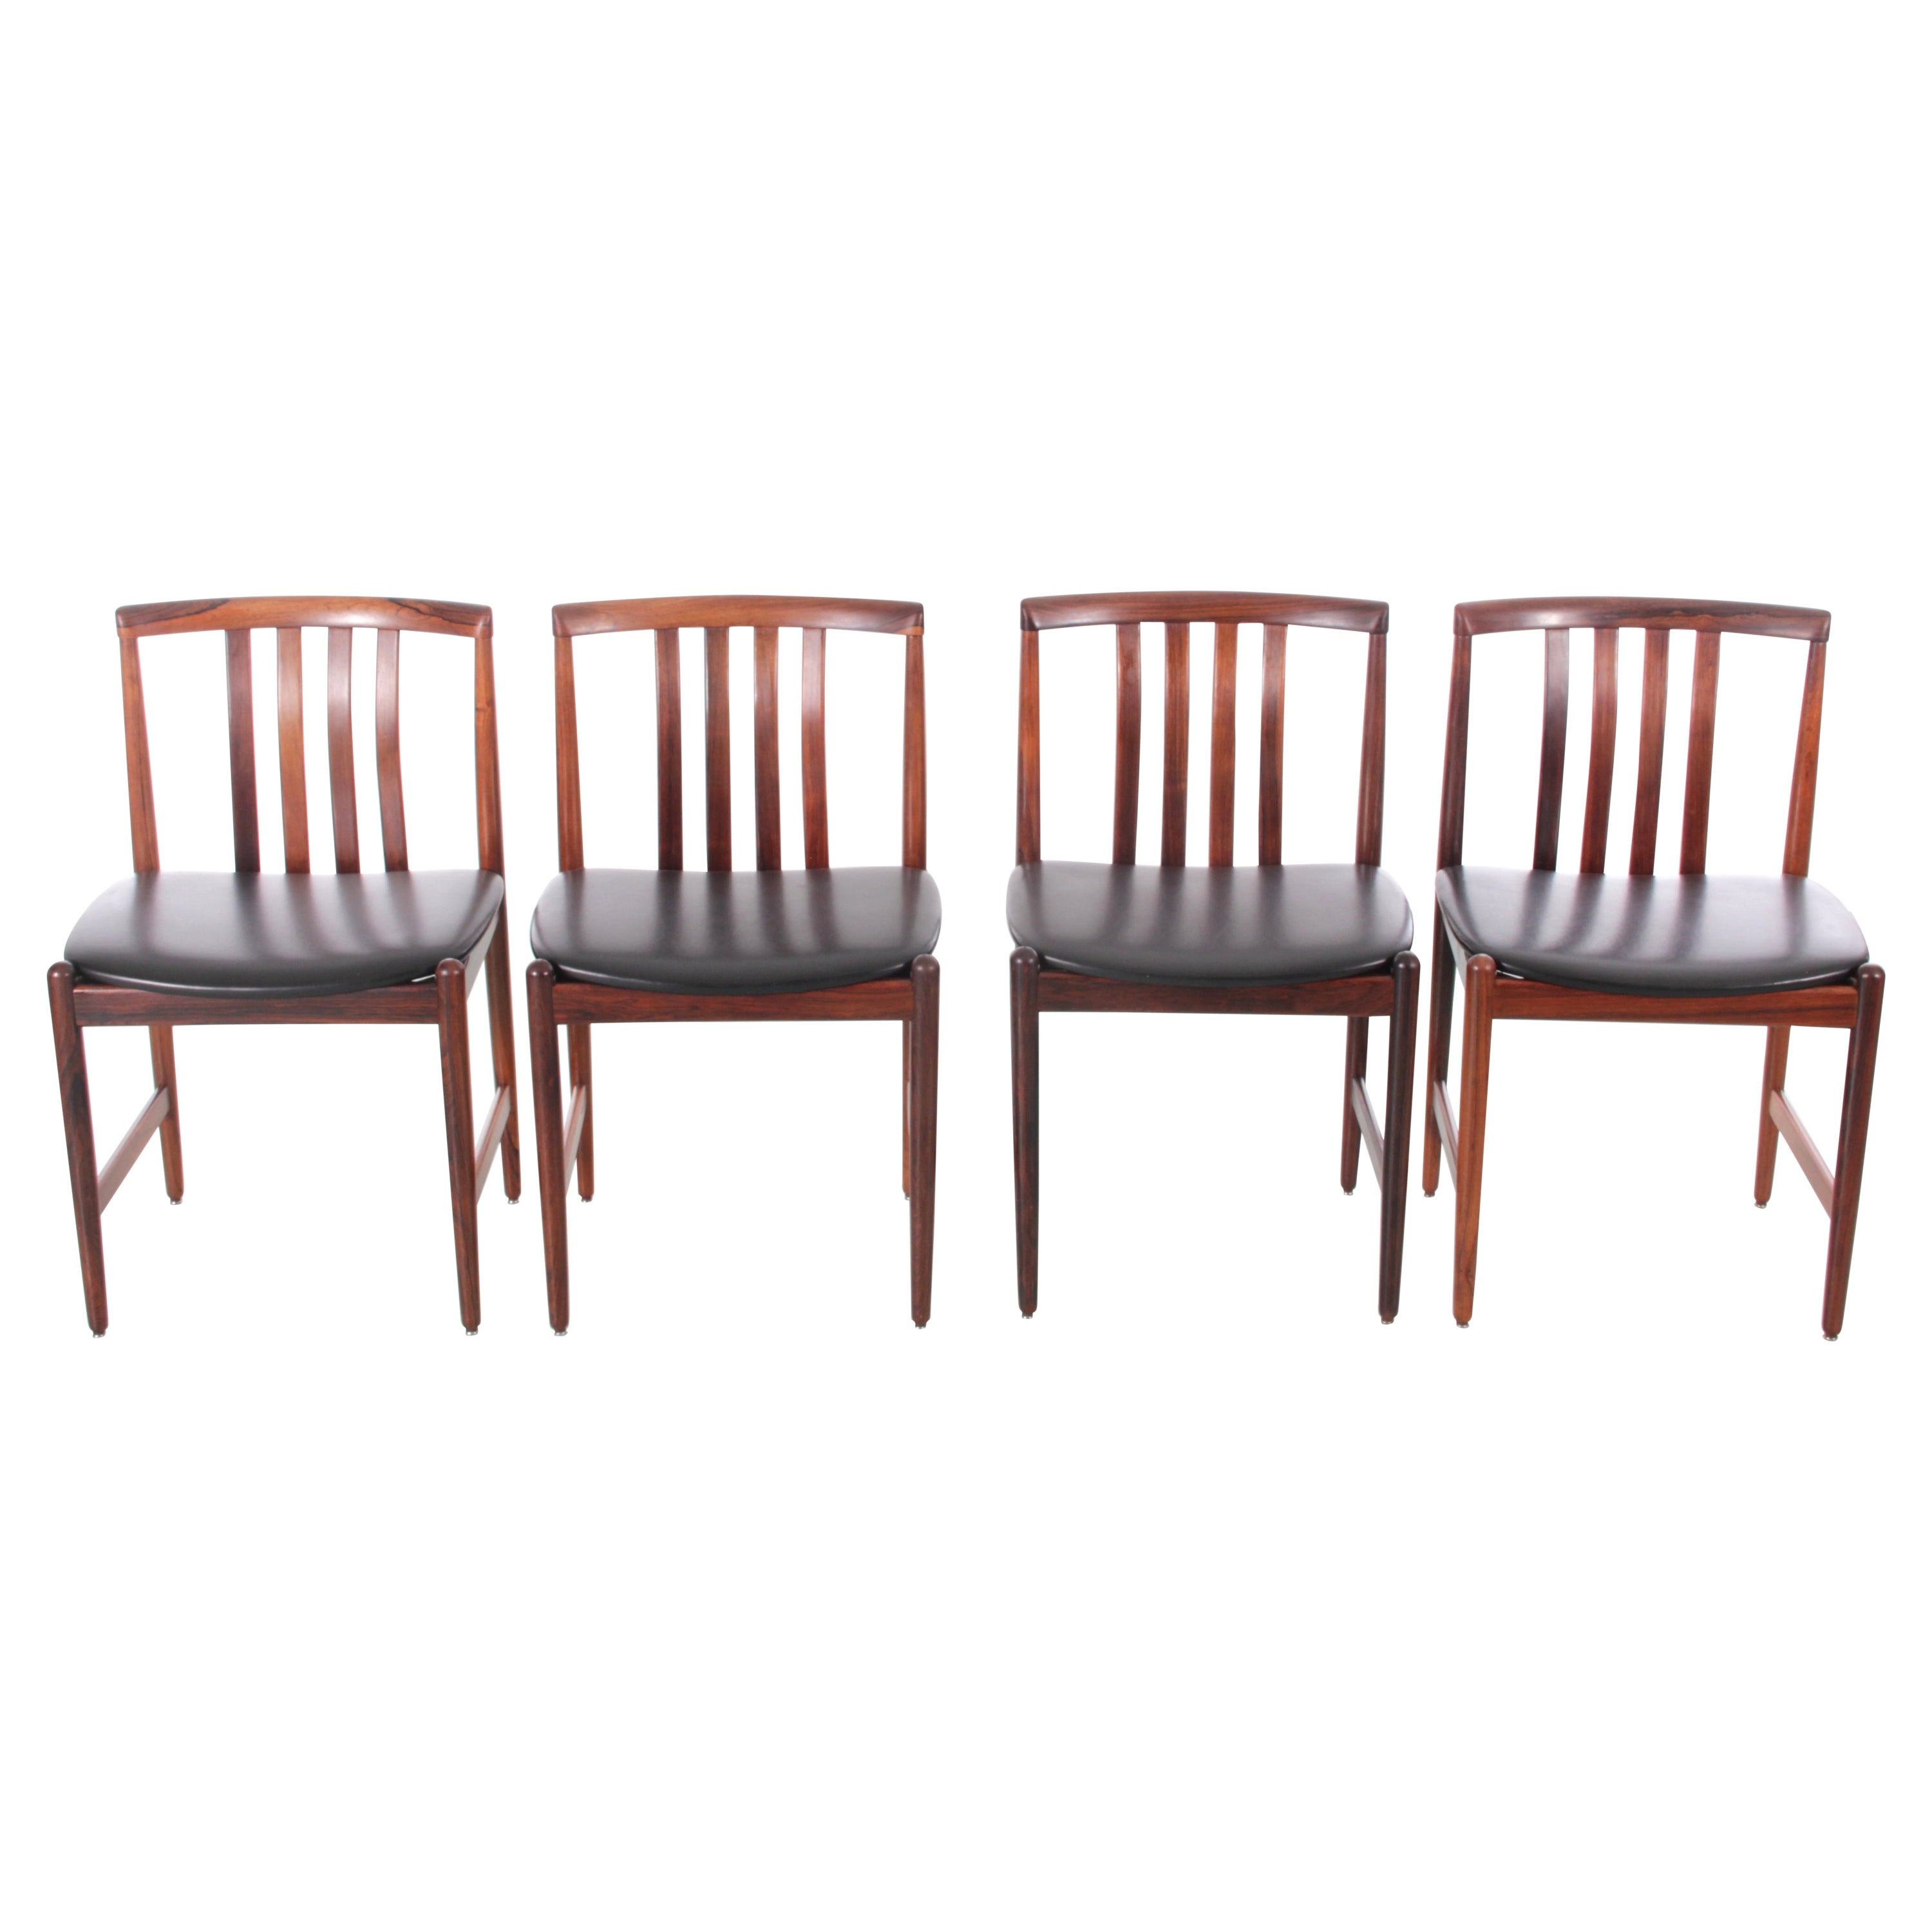 Mid-Century Modern Set of 4 Dining Chairs in Rosewood by Westnofa